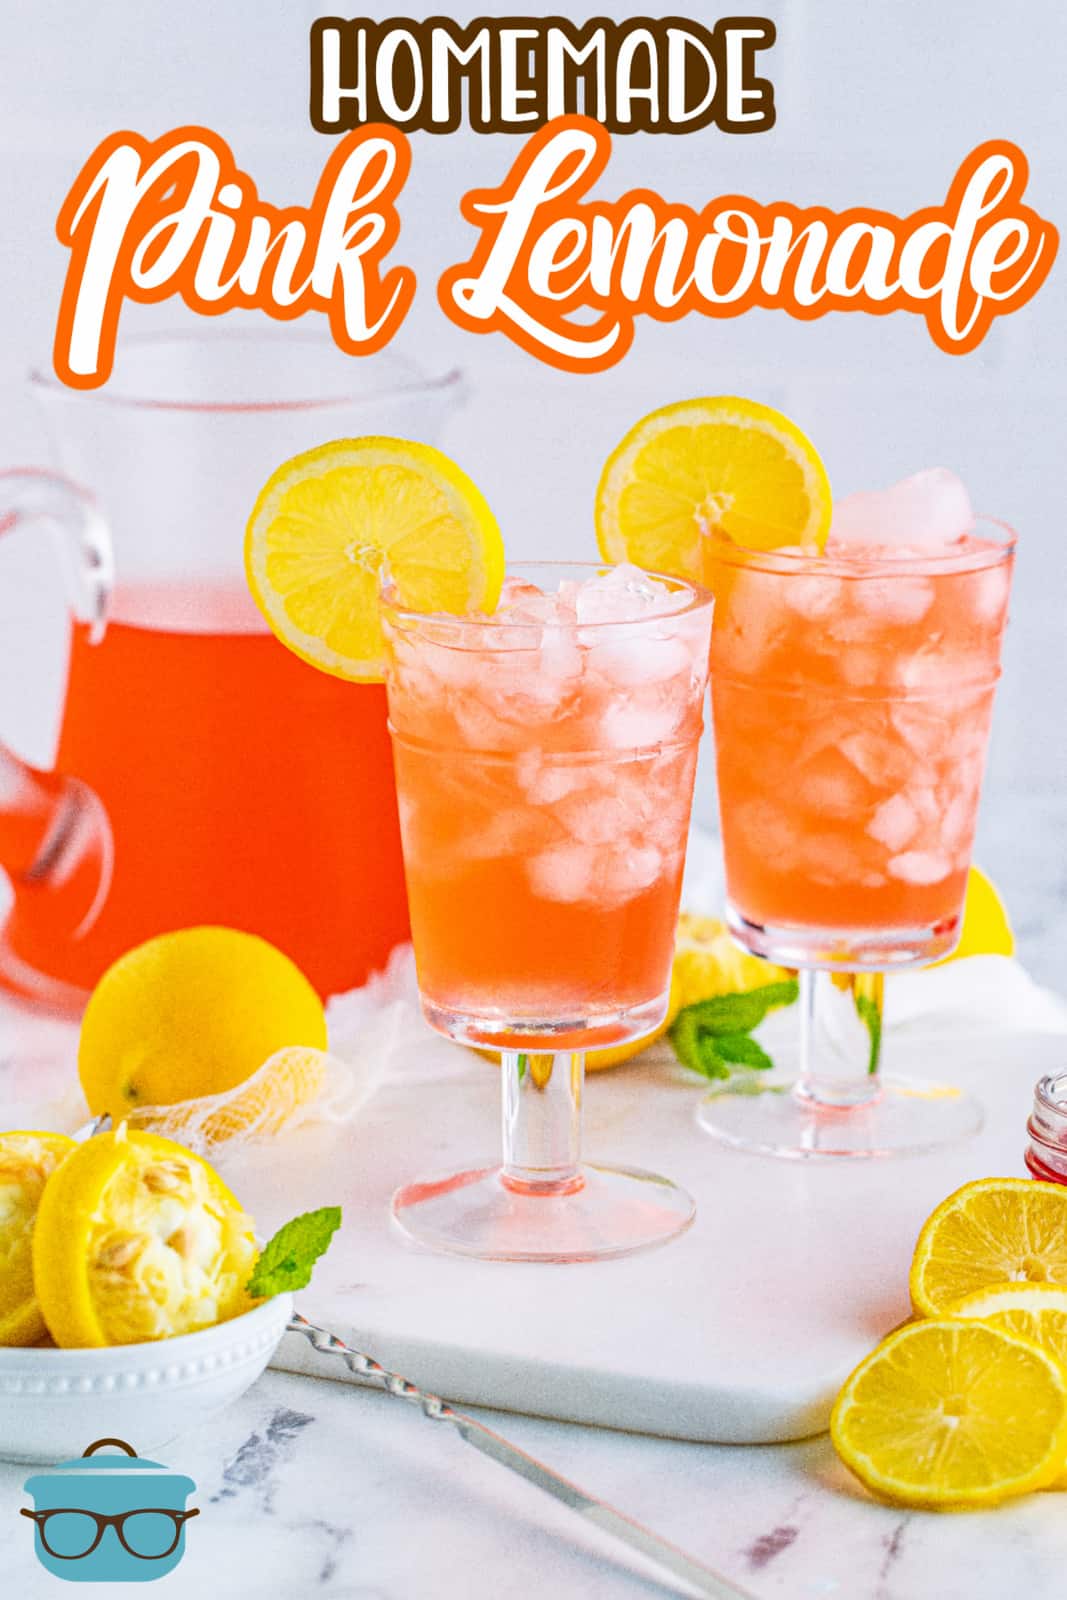 Two glasses of Homemade Pink Lemonade on white platter garnished with lemon with pitcher in background.